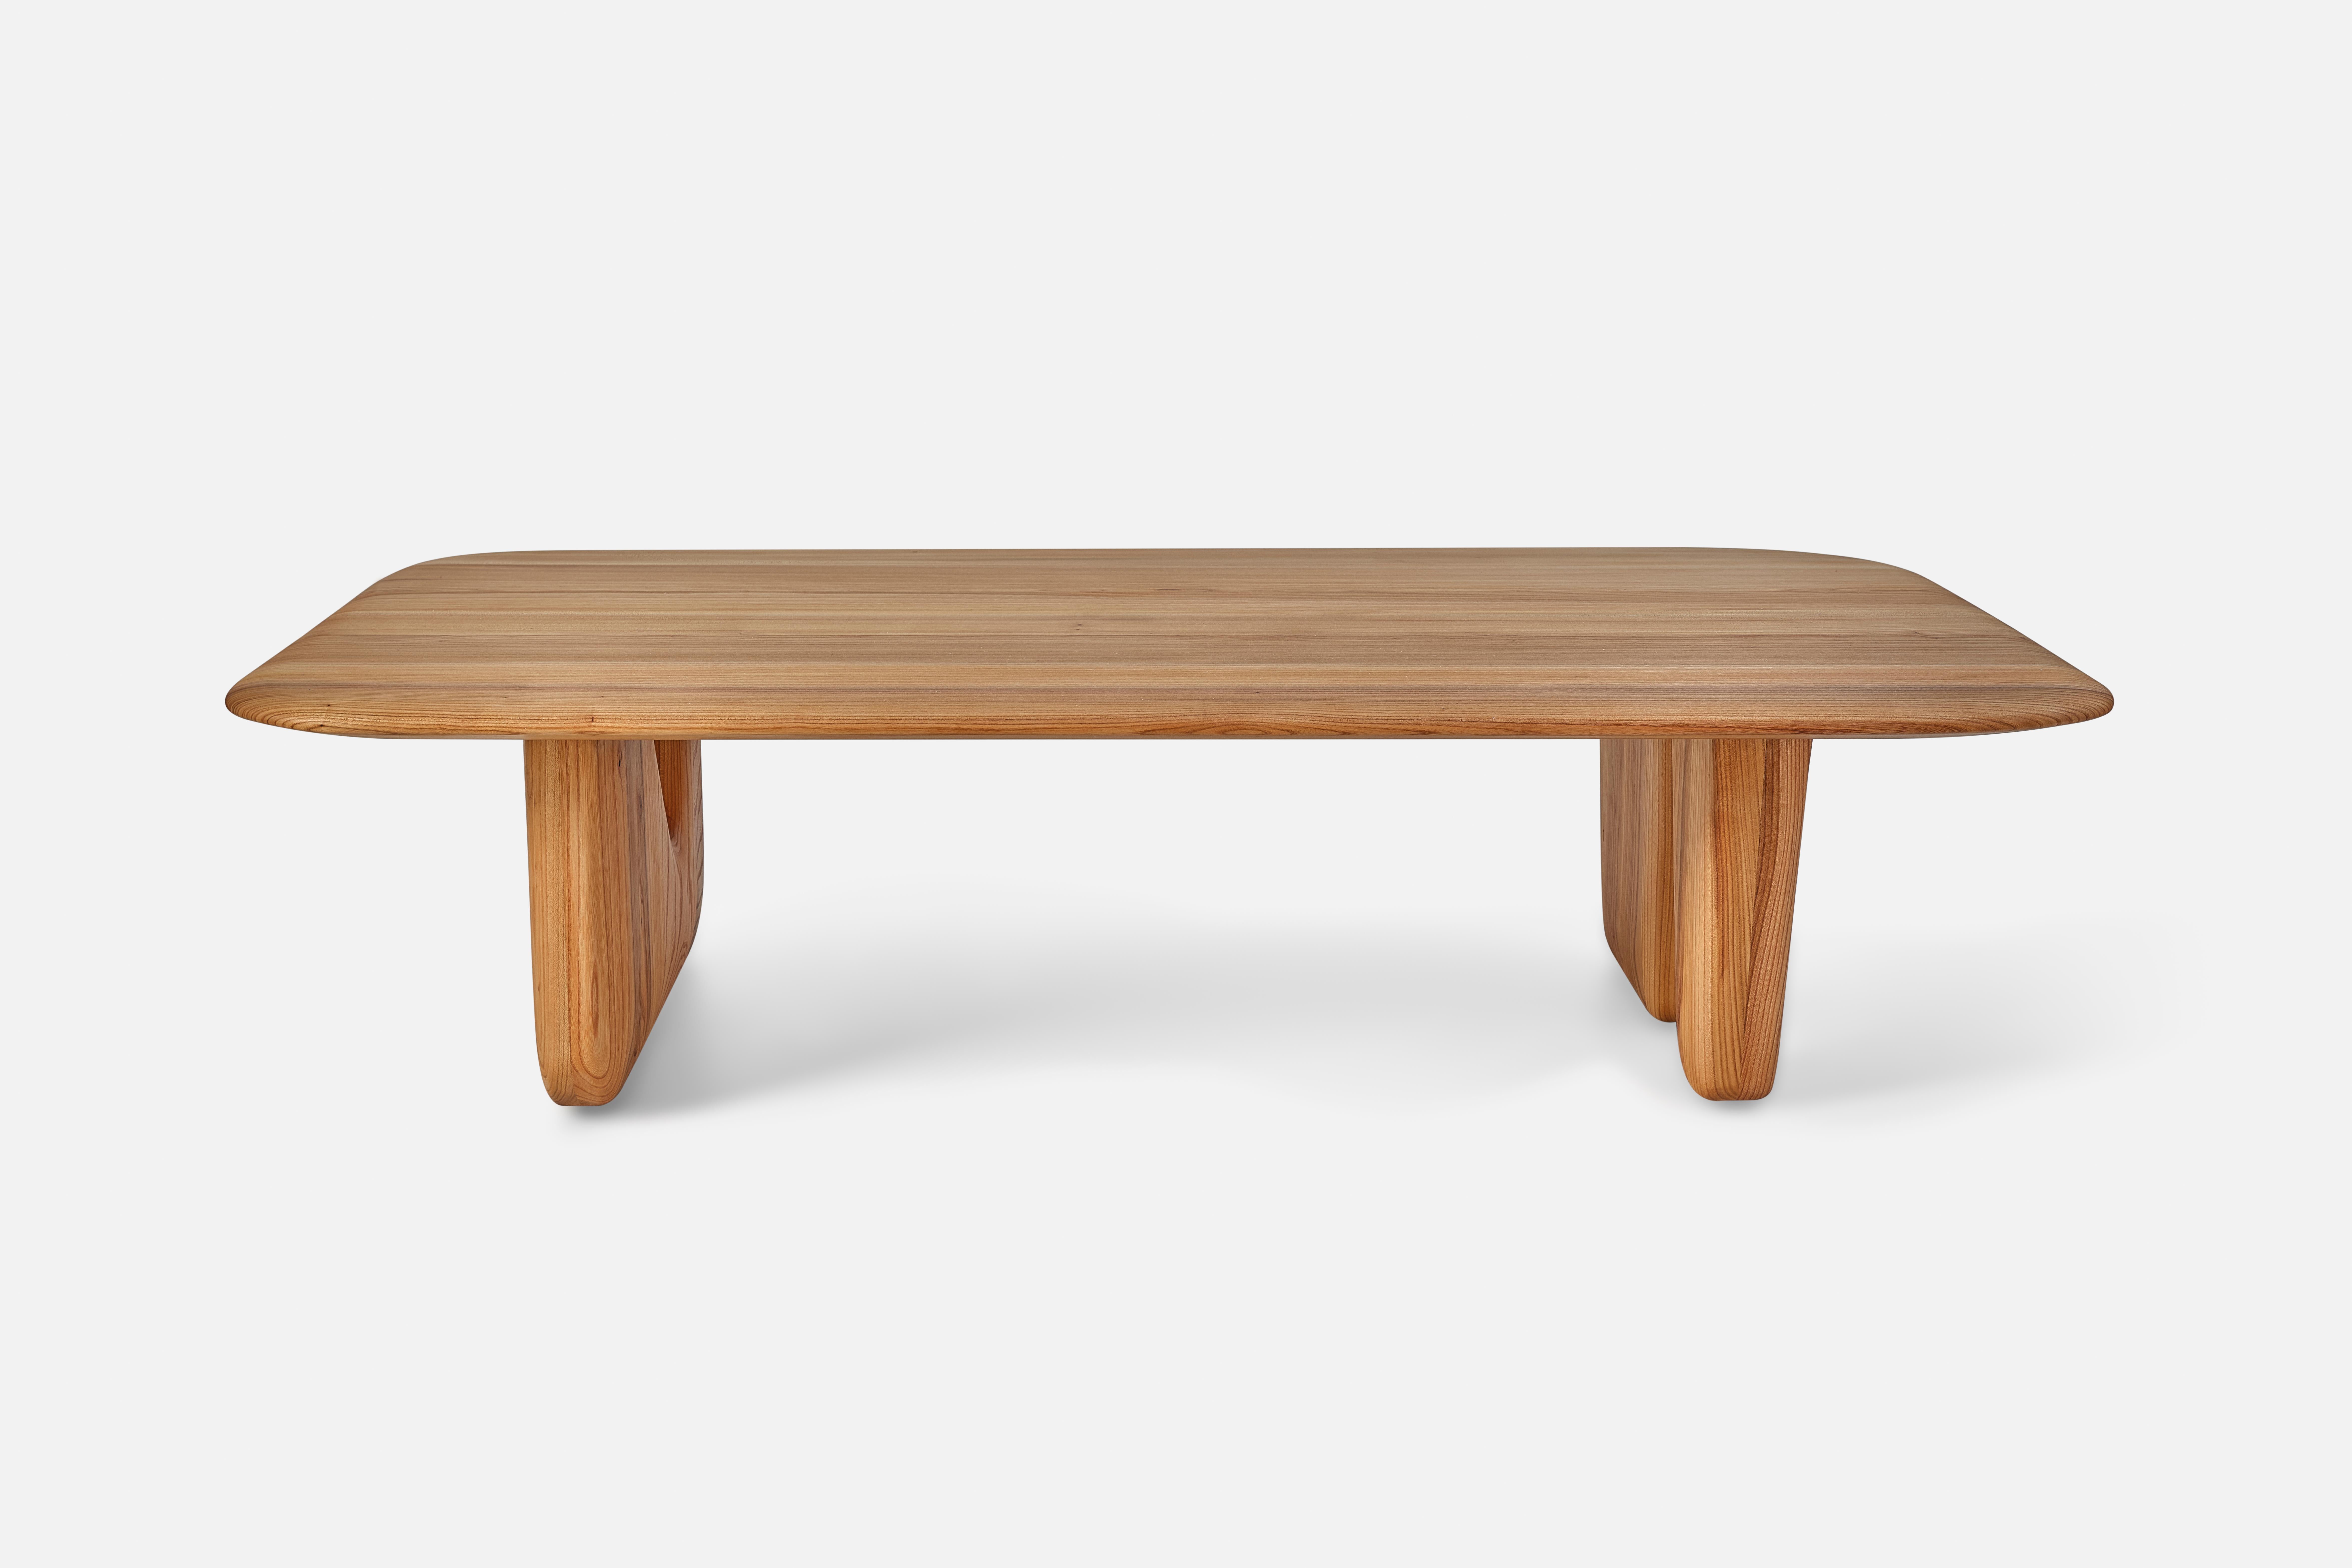 Halach Low Table L by Contemporary Ecowood
Dimensions: W 111 x D 185 x H 45 cm.
Materials: American Oak.
Color: Natural

Contemporary Ecowood’s story began in a craft workshop in 2009. Our wood passion made us focus on fallen trees in the